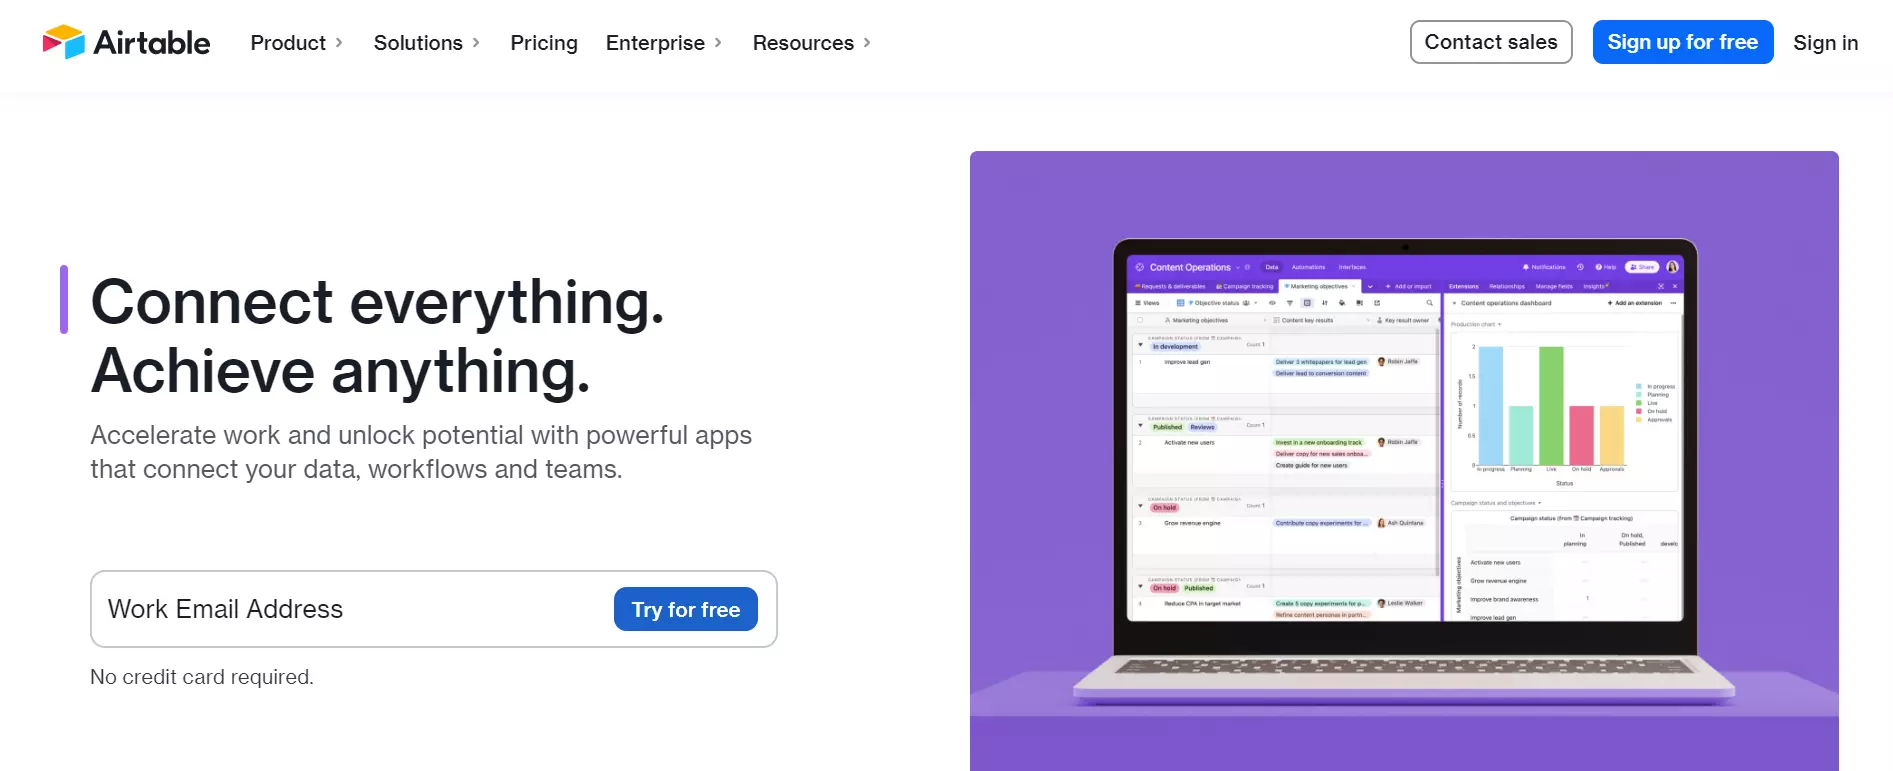 Airtable Landing Page